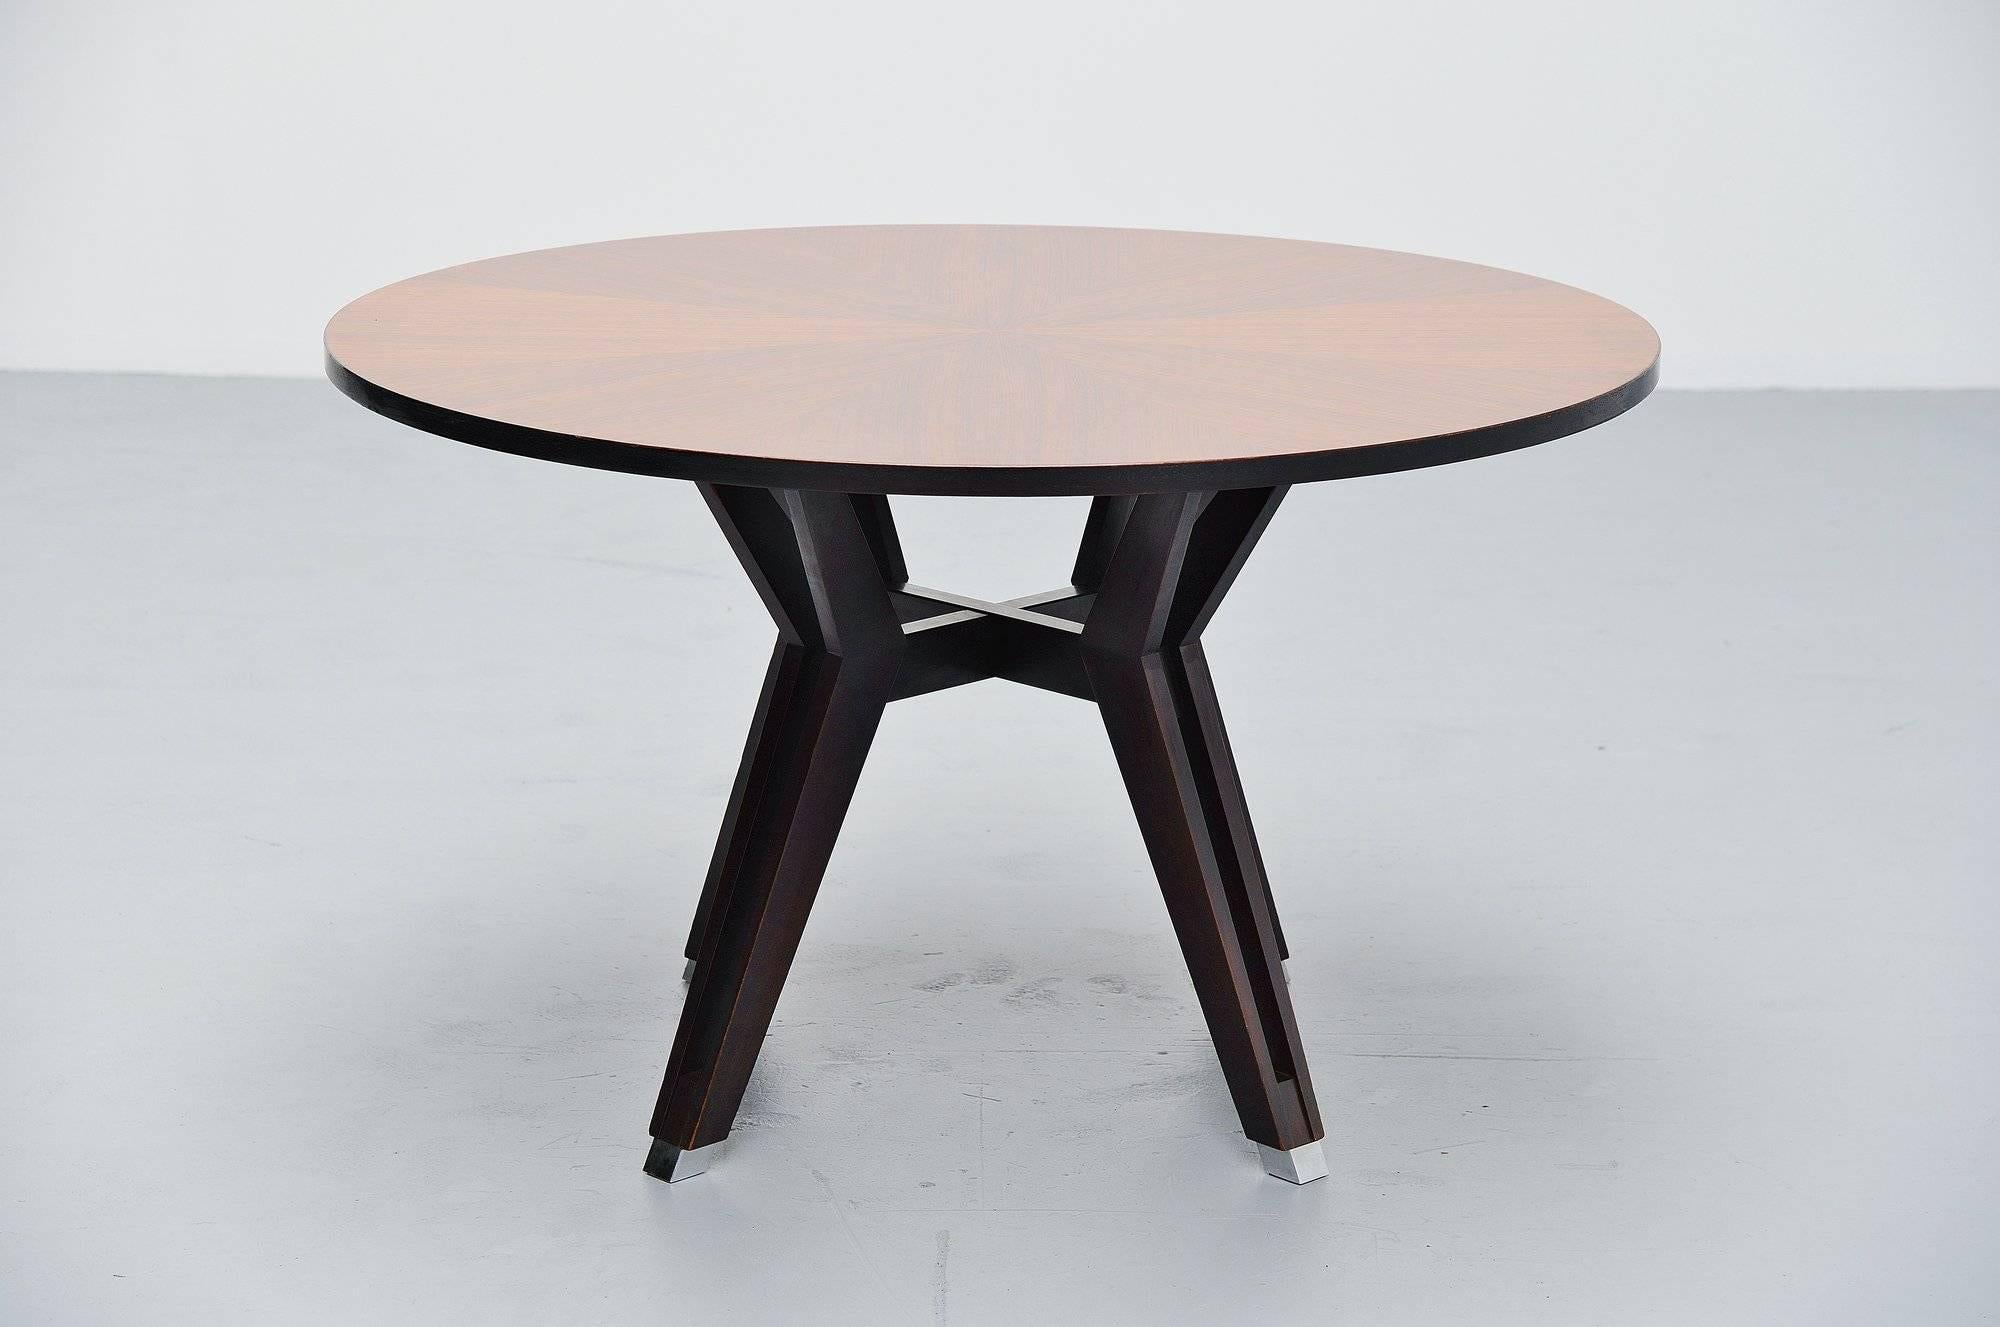 Superb dining table designed by Ico Paris for MiM Roma, Italy, 1958. The table is made of rosewood and has metal protected feet. The table has a very nice shiny lacquer finish on the top and a nice grain to the rosewood. It is marked with the MiM